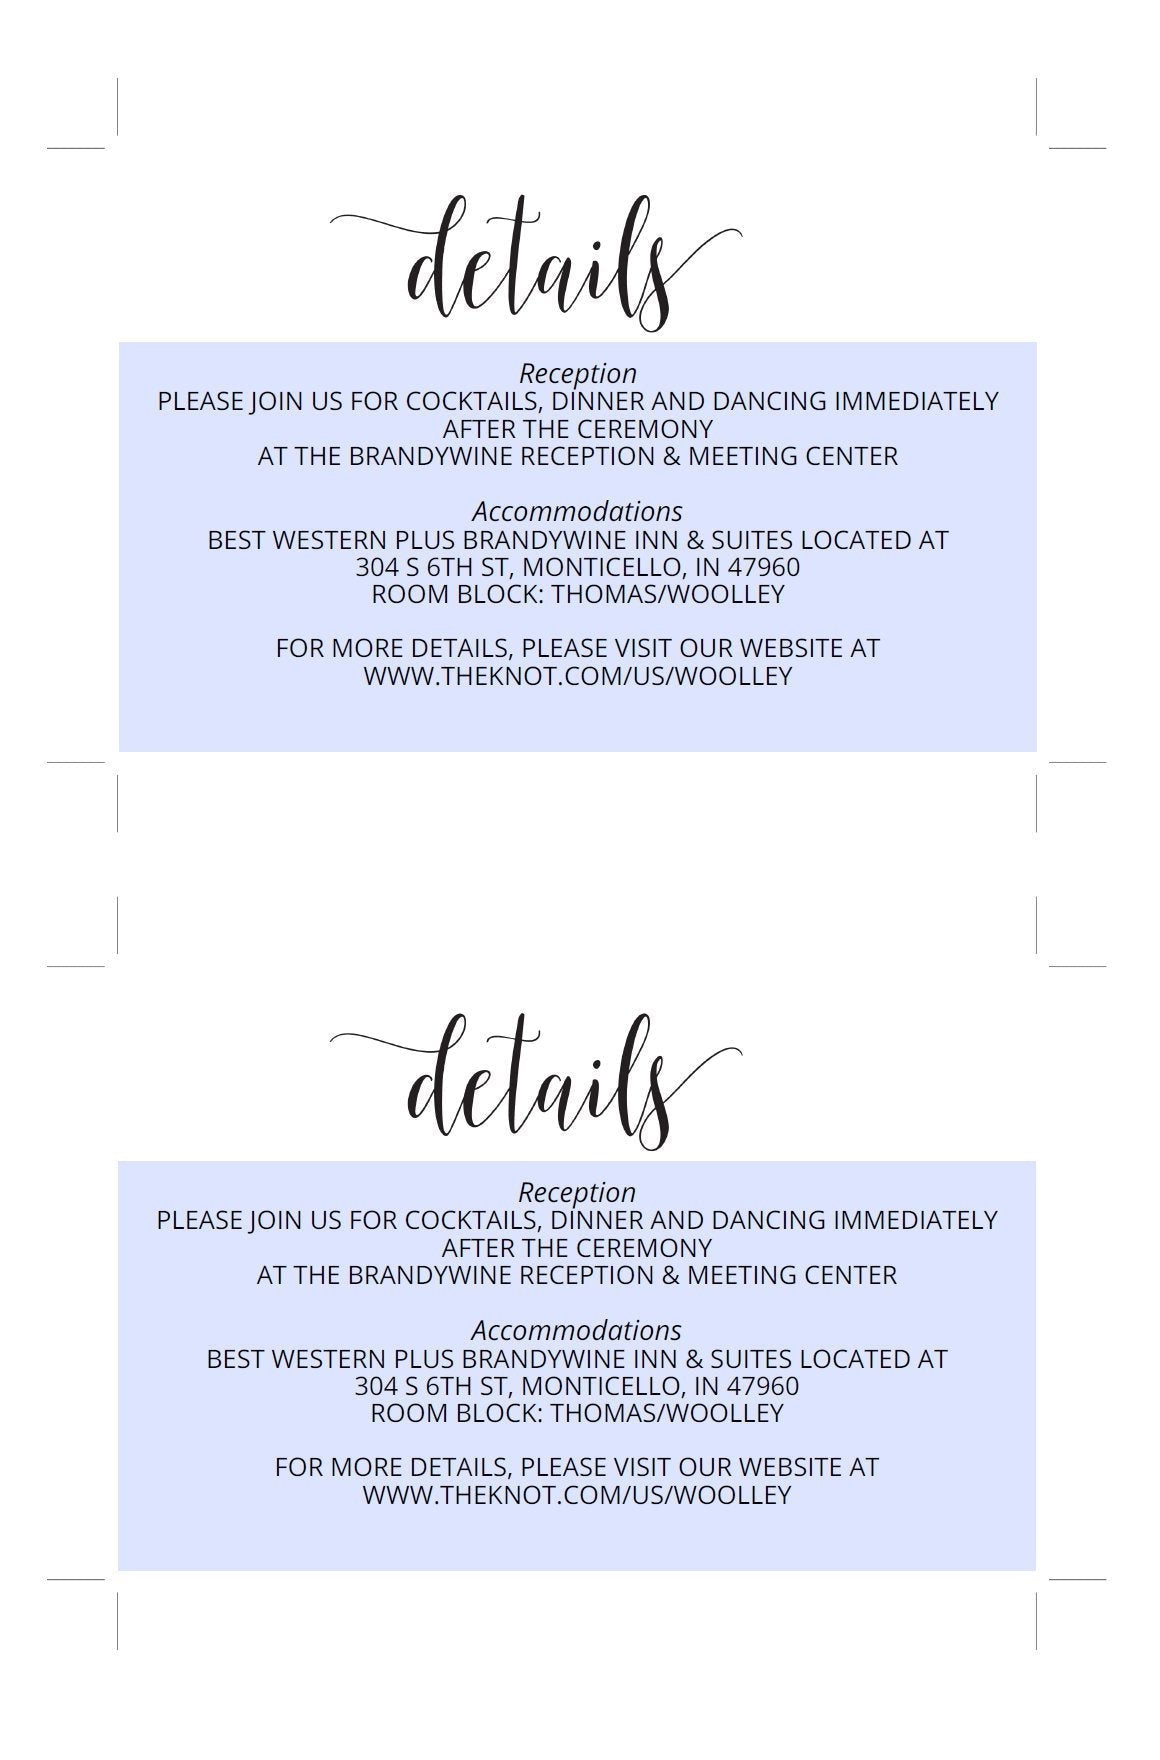 Wedding Details Card Template, Instant Download, Information Card, Wedding Info Card, Rustic Wedding,Details Template  - Hannah RSVP & DETAILS CARDS SAVVY PAPER CO